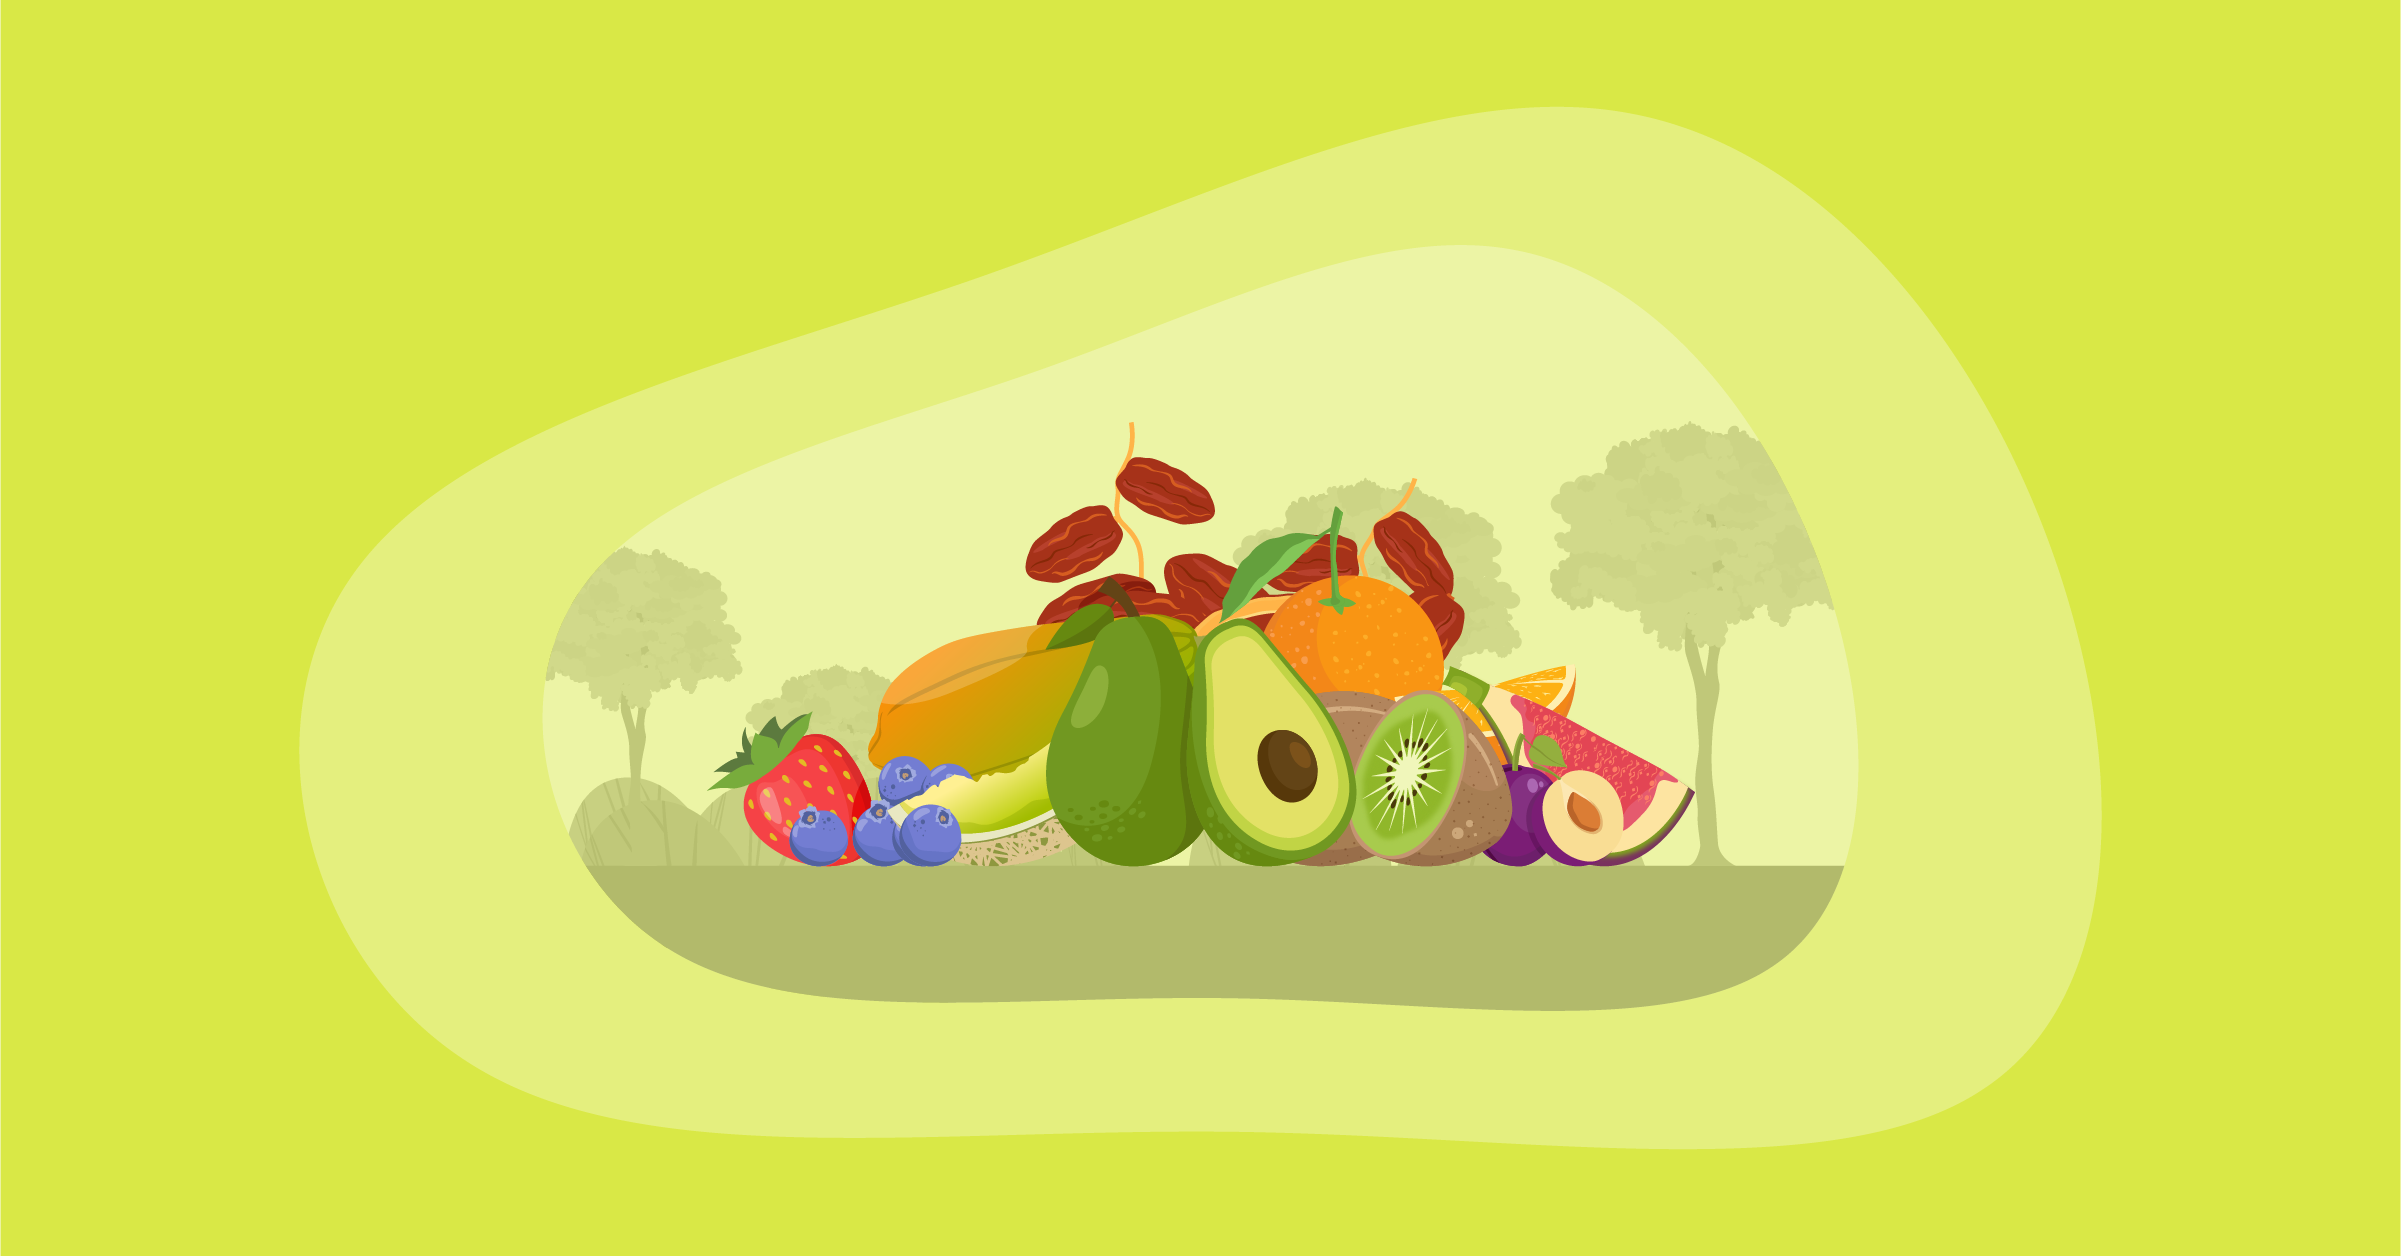 Illustration of fruits with the highest carbon footprint